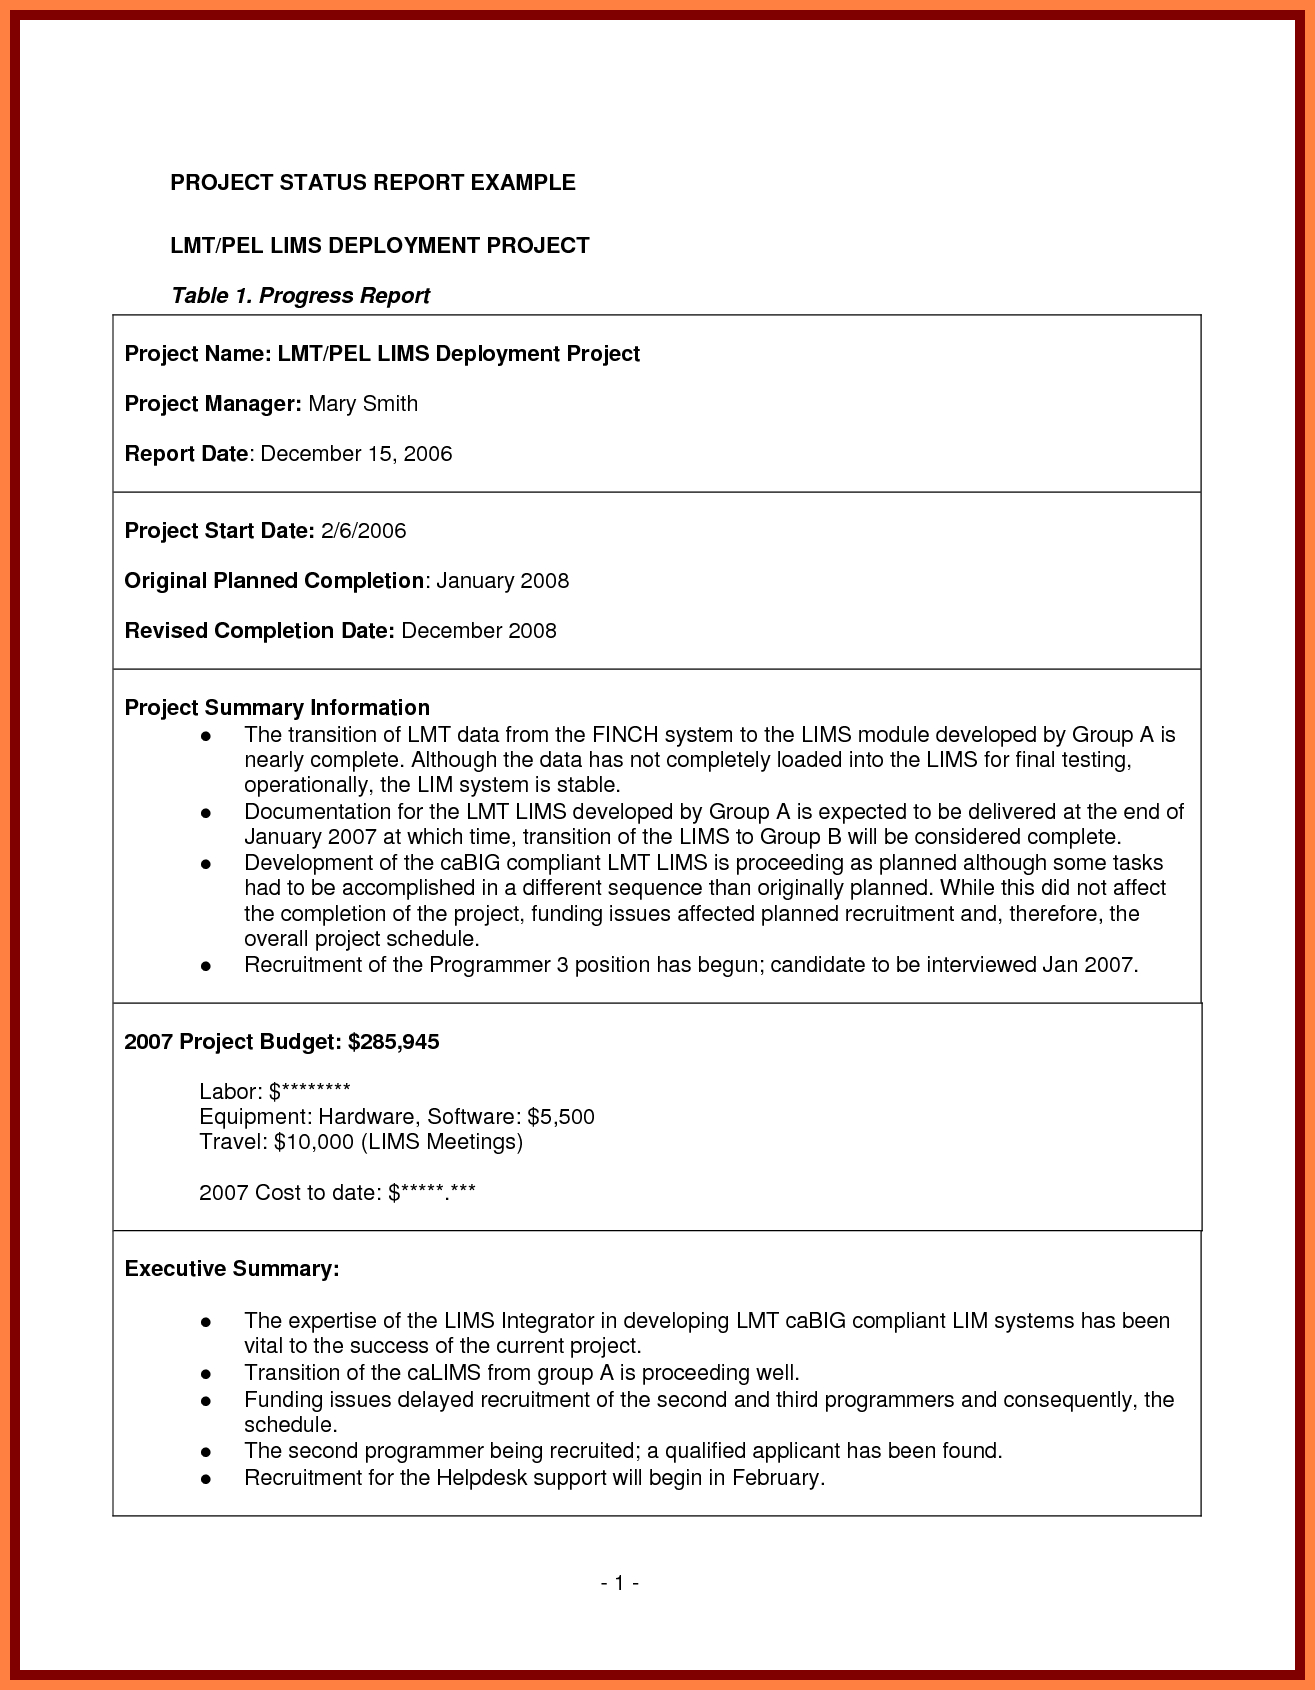 Project Management Final Report Template  Progress Report throughout Project Management Final Report Template